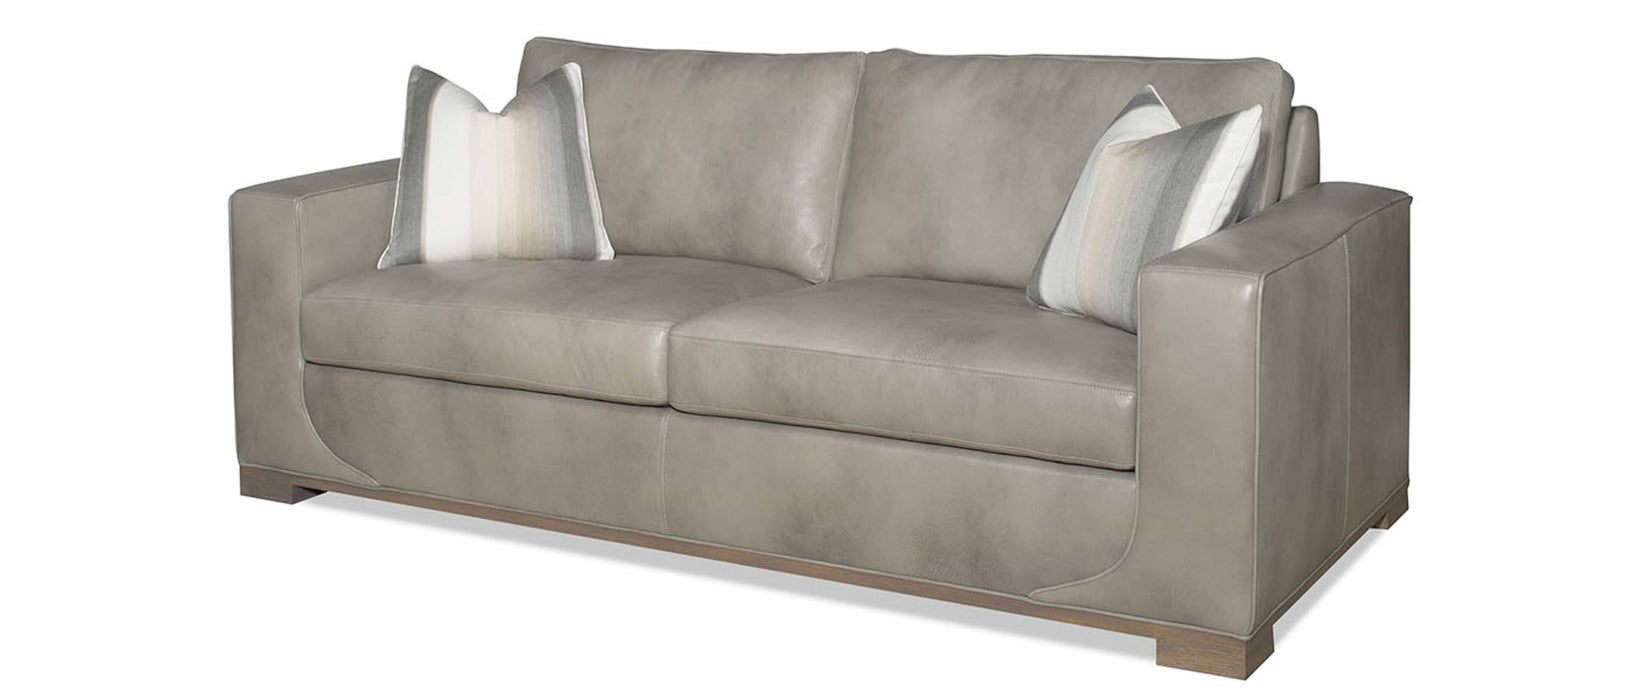 Maybank Leather Queen Size Sofa Sleeper | American Tradition | Wellington's Fine Leather Furniture